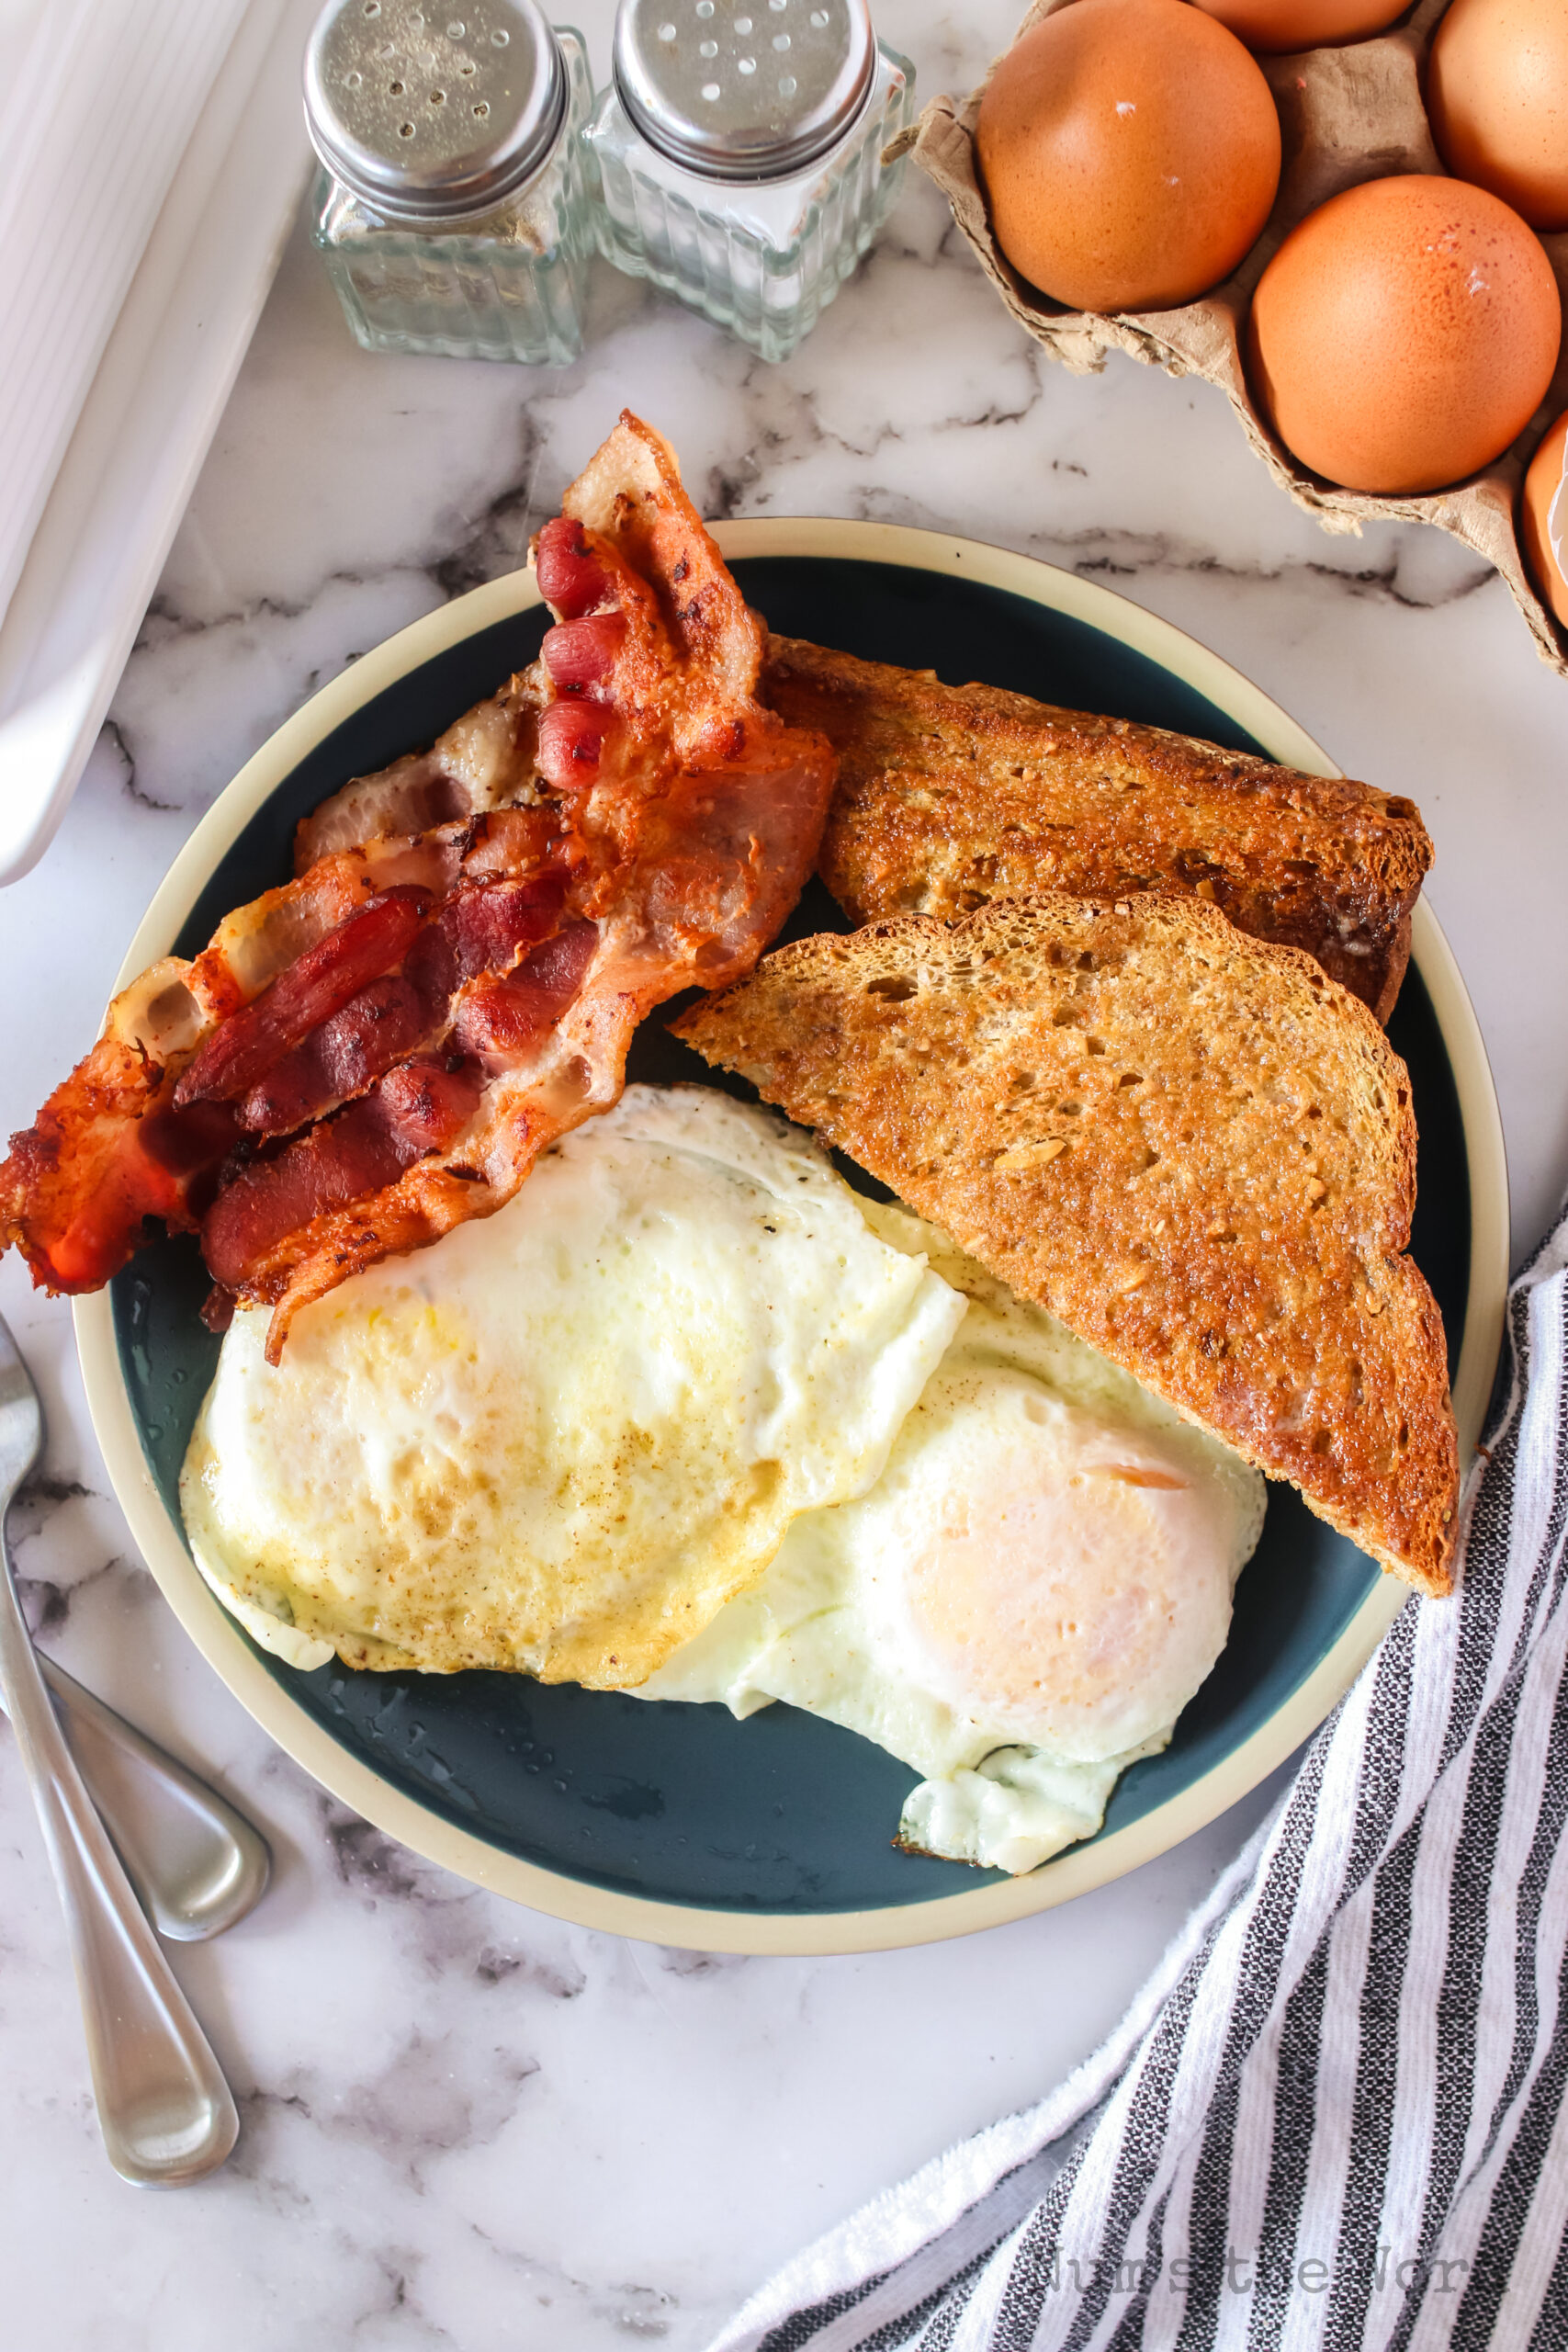 zoomed out image of eggs on plate with toast and bacon